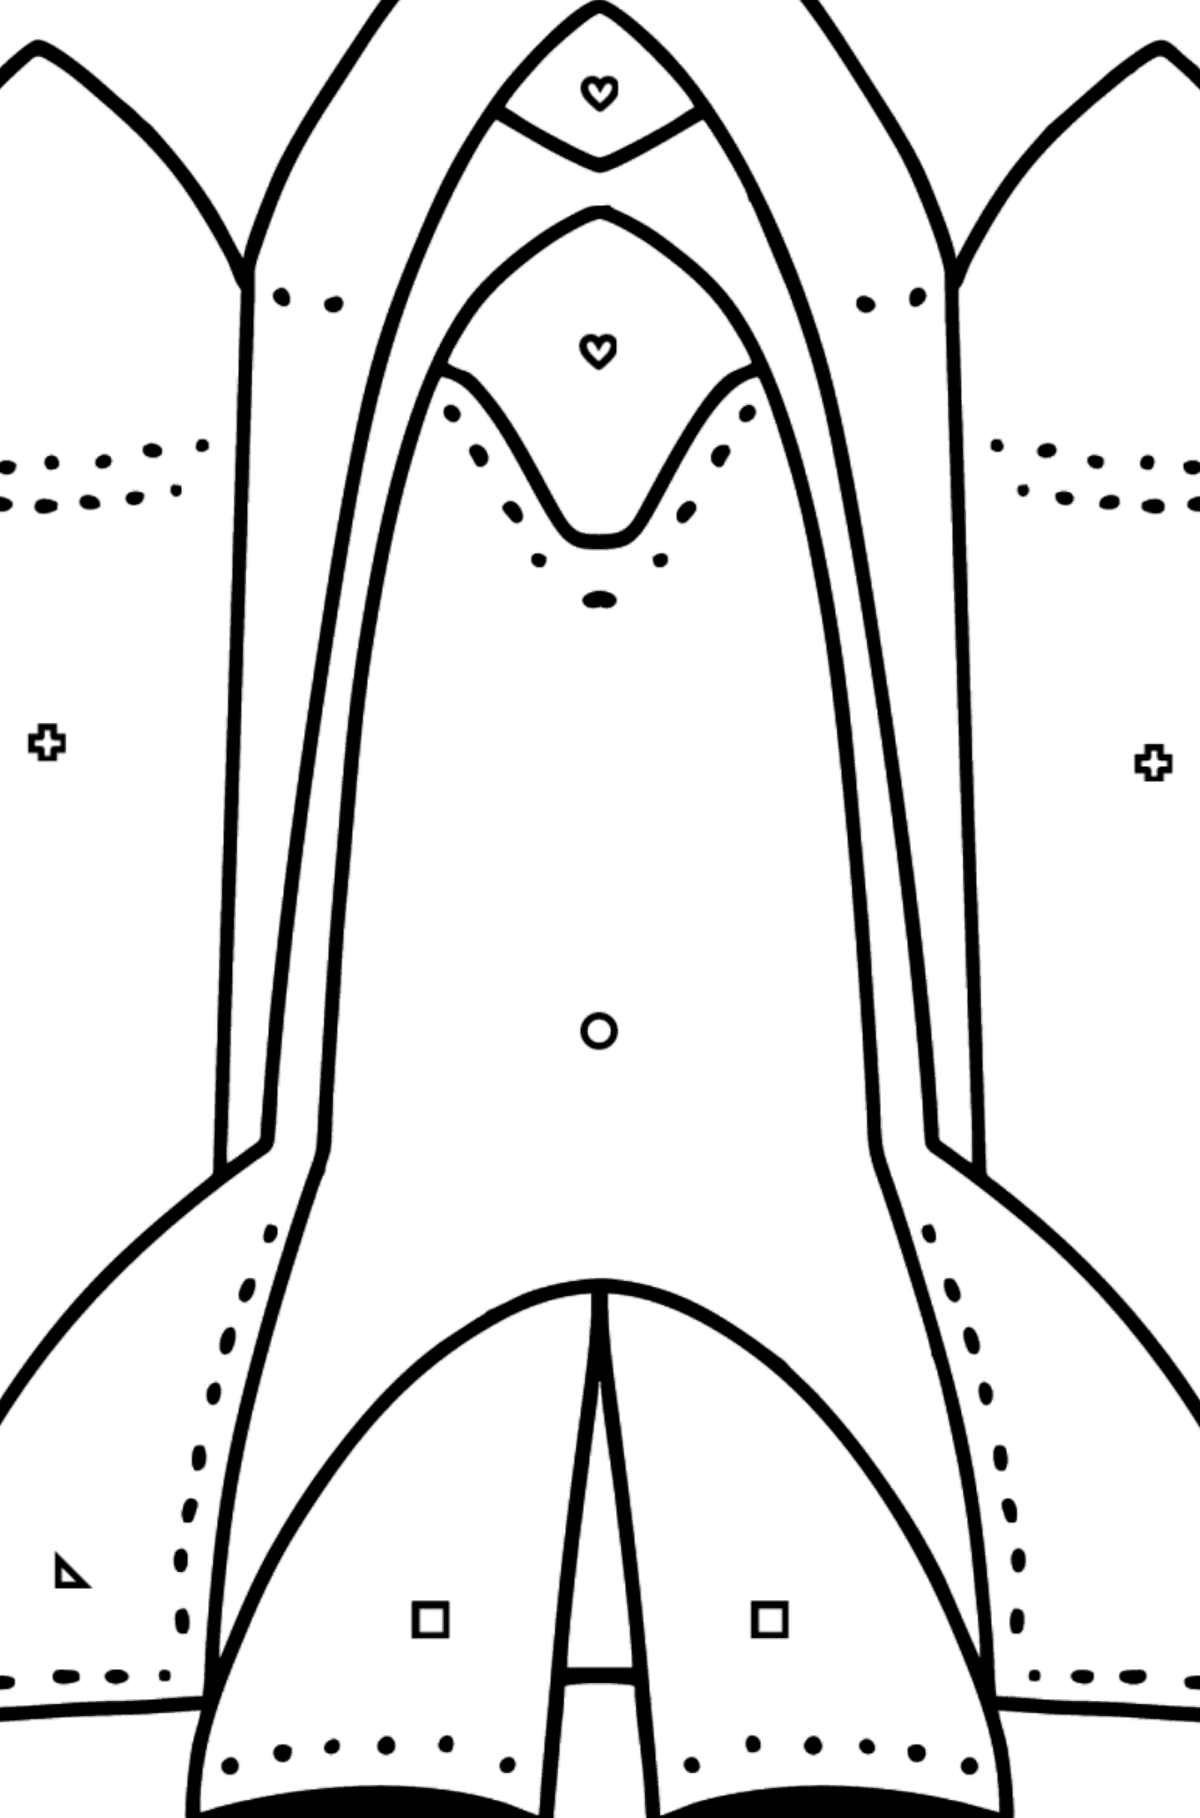 Shuttle coloring page - Coloring by Geometric Shapes for Kids